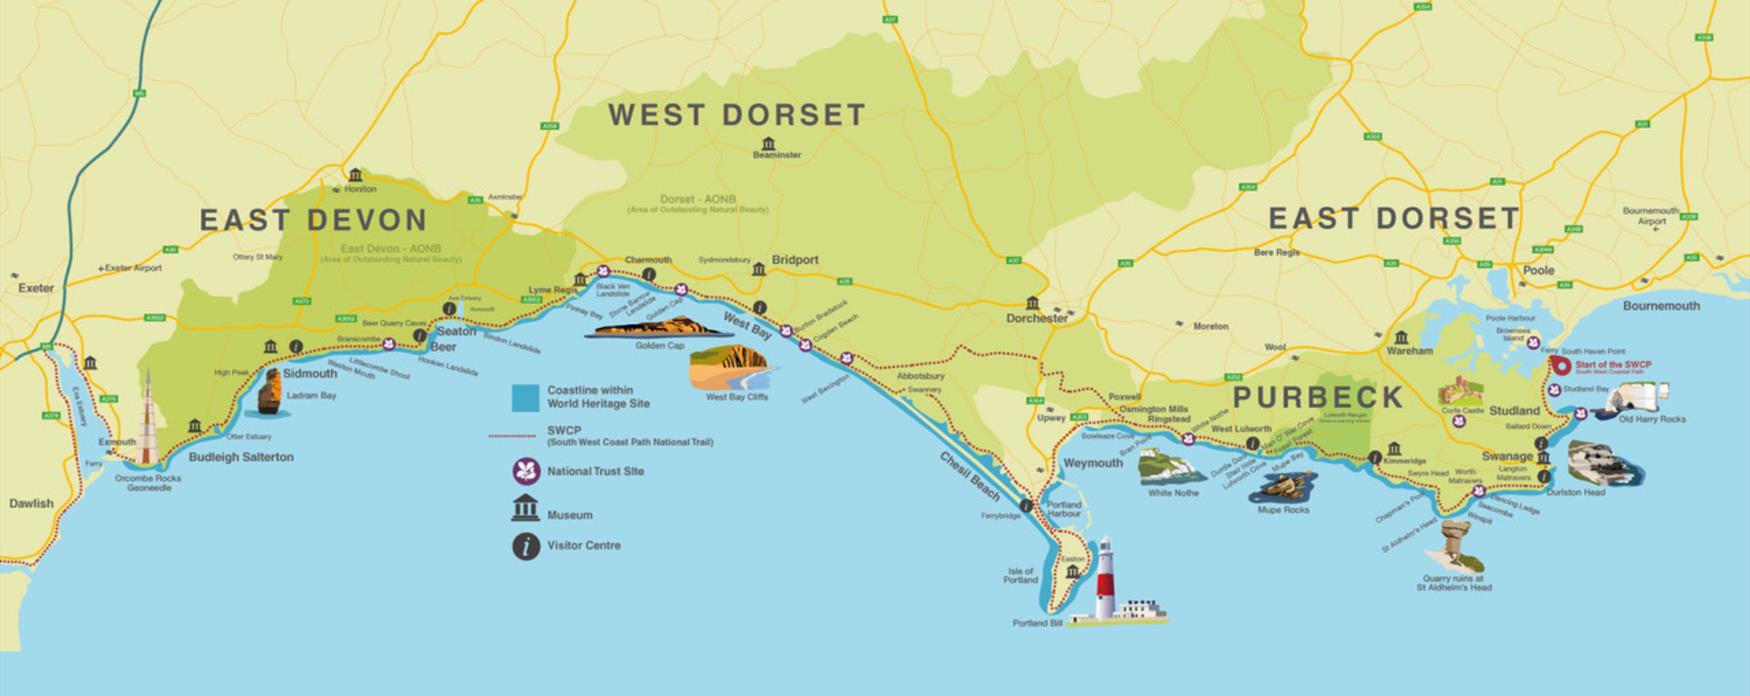 A graphic map of the Jurassic Coast